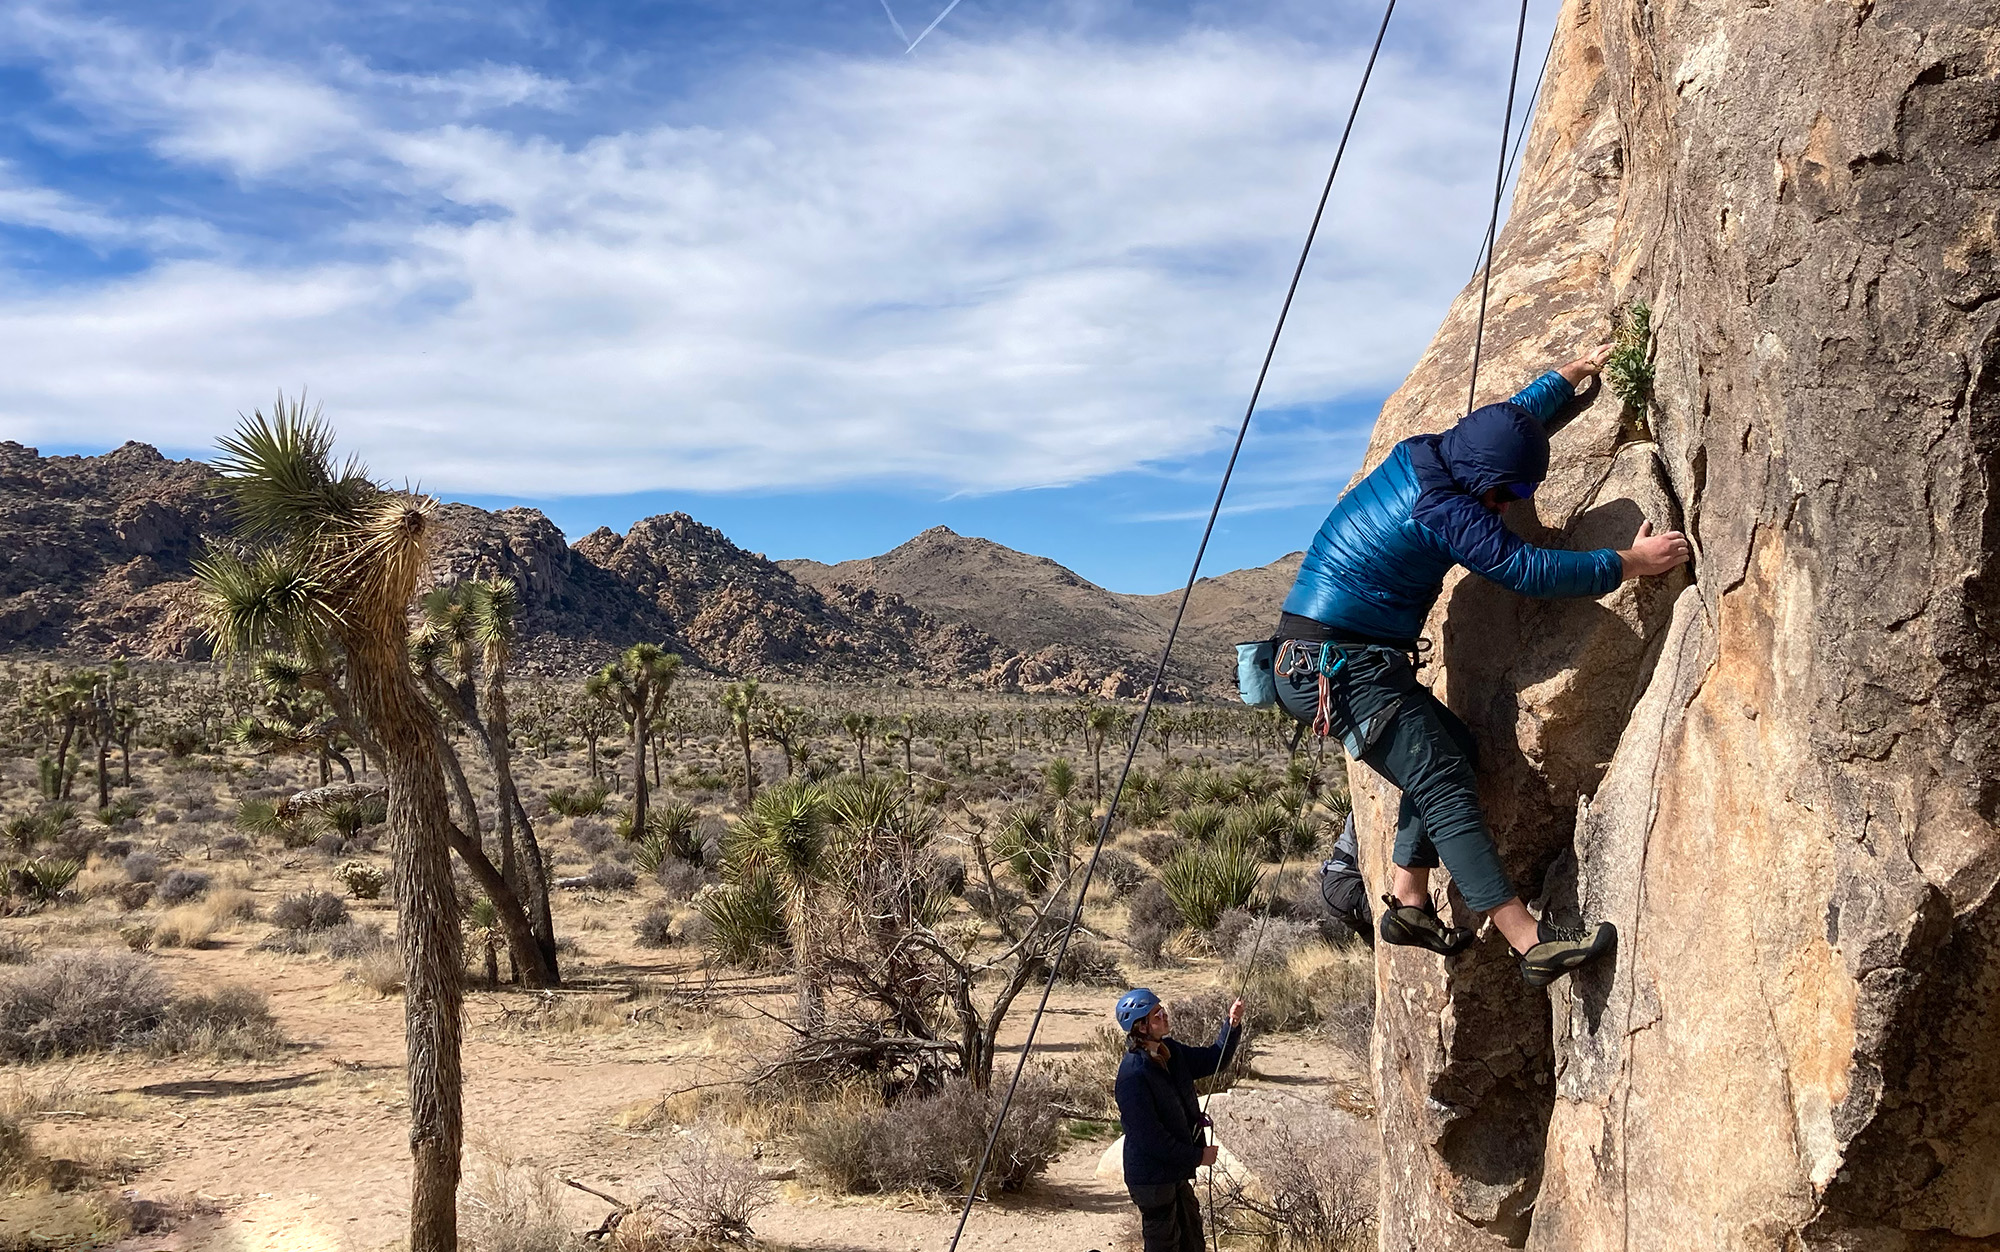 Climber ascends route in Joshua Tree.